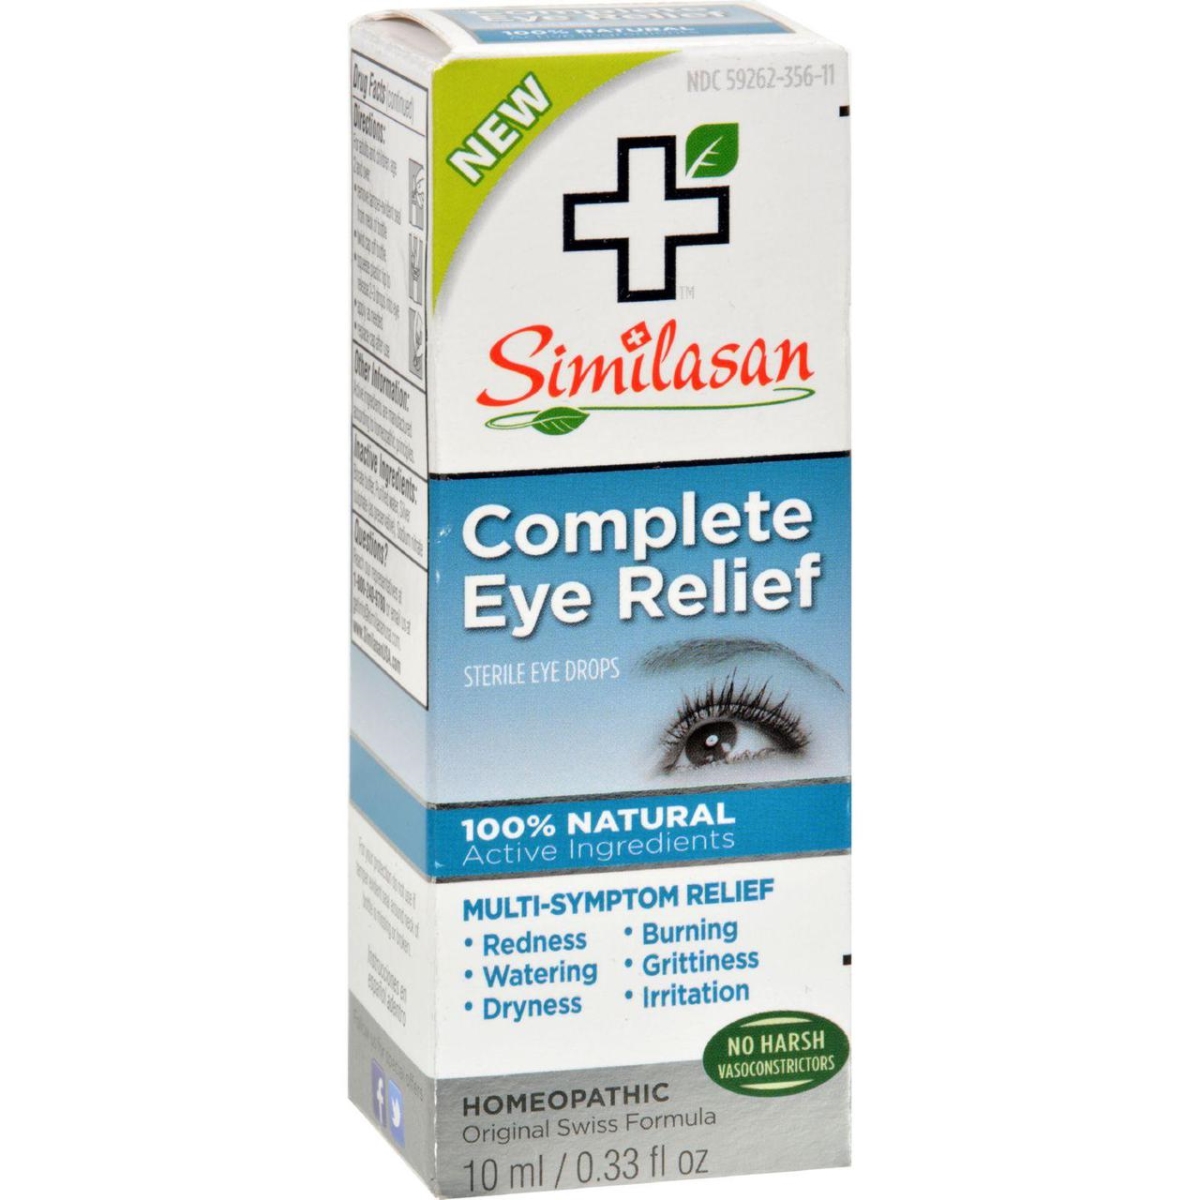 Hg1510239 0.33 Oz Eye Drops - Complete Relief